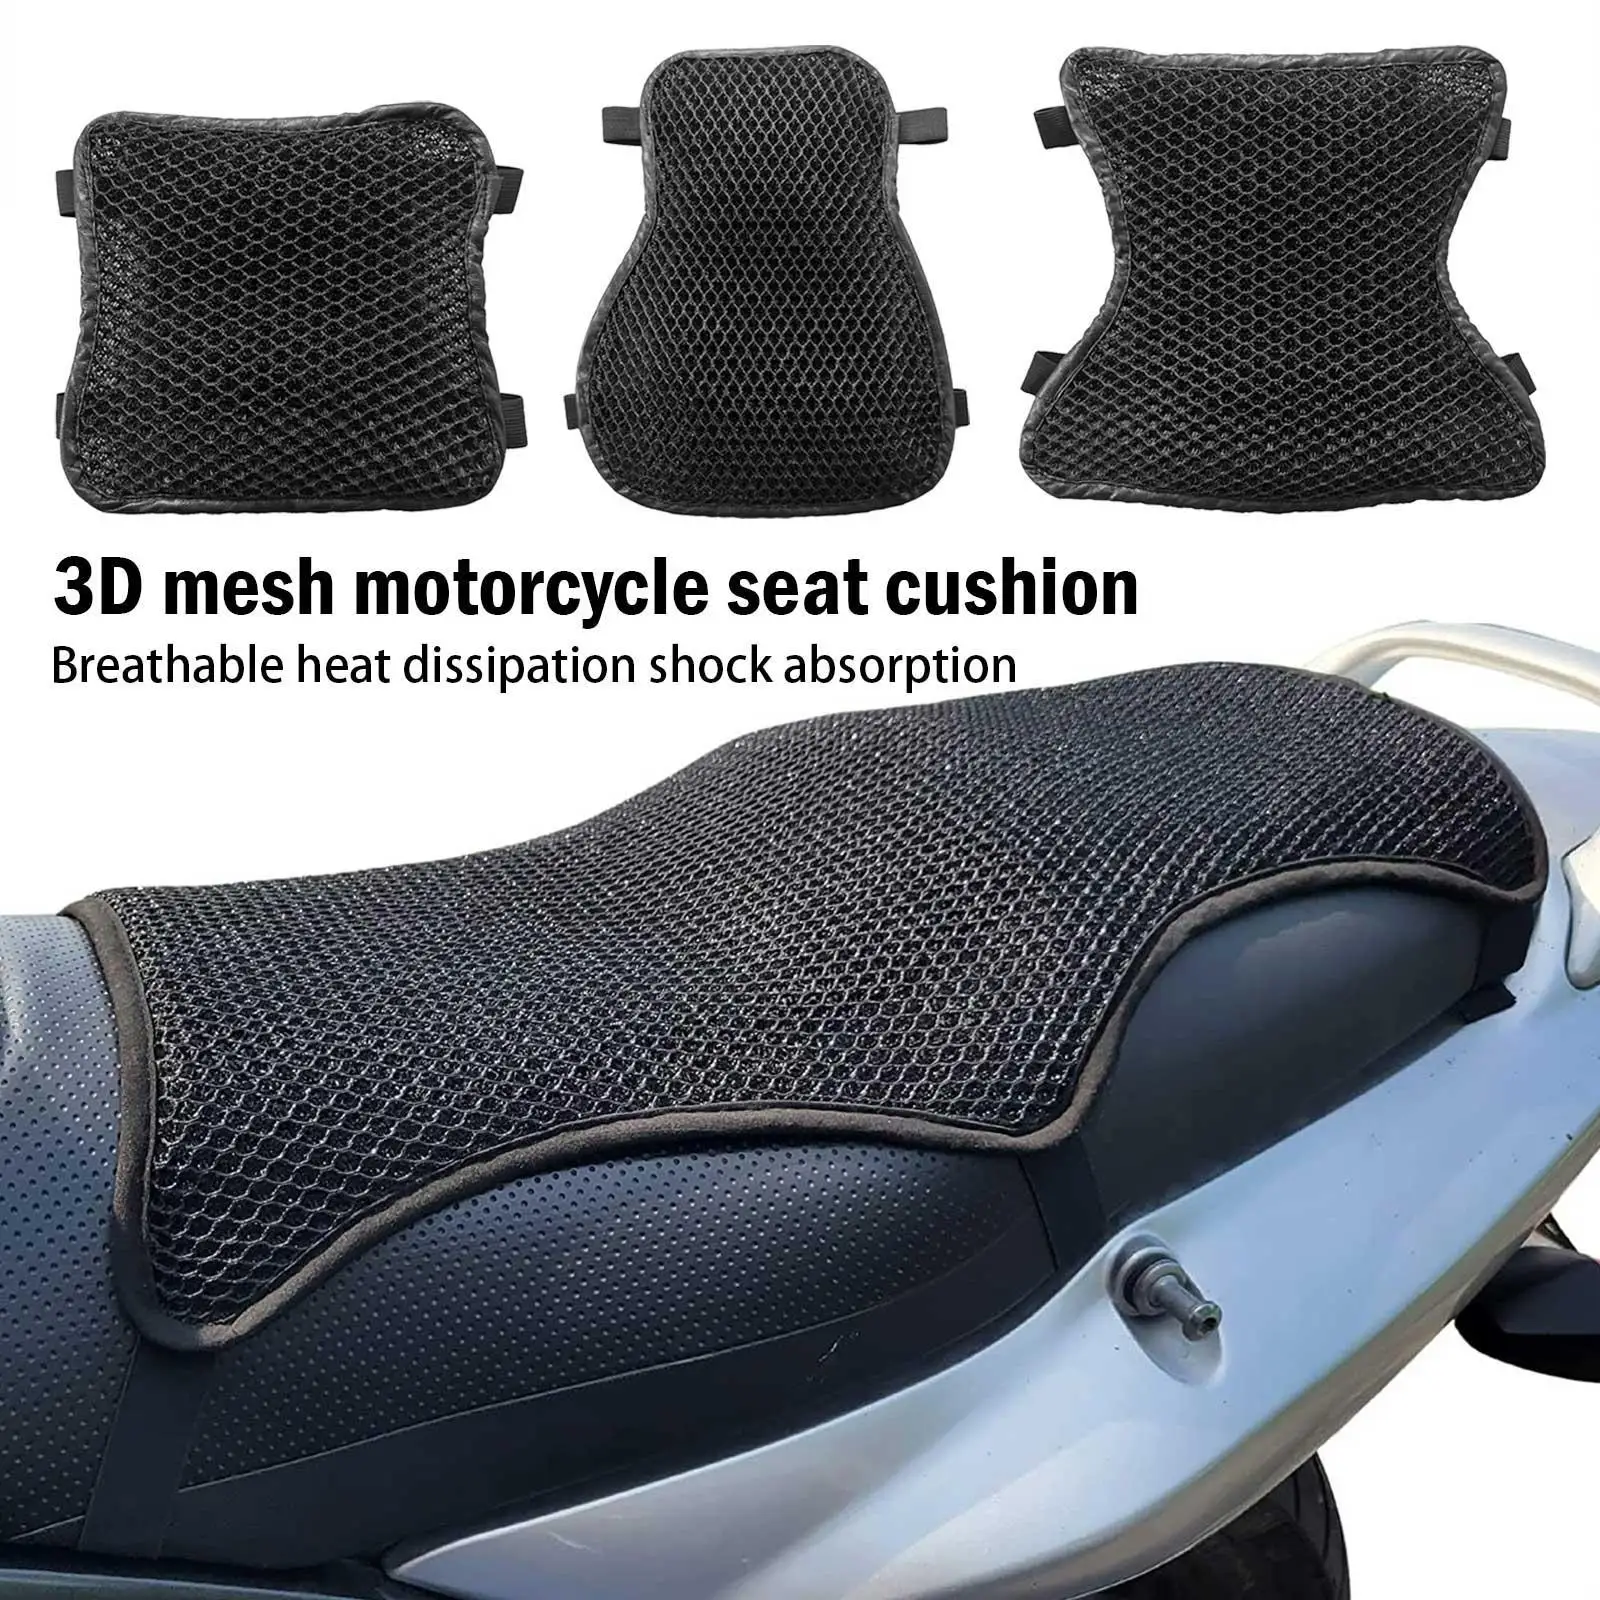 

Motorcycle Seat Cushion Double Layer 3D Mesh Cloth Breathable Non-slip Cool Seat Cover Heat Dissipation Shock Absorption Cushion